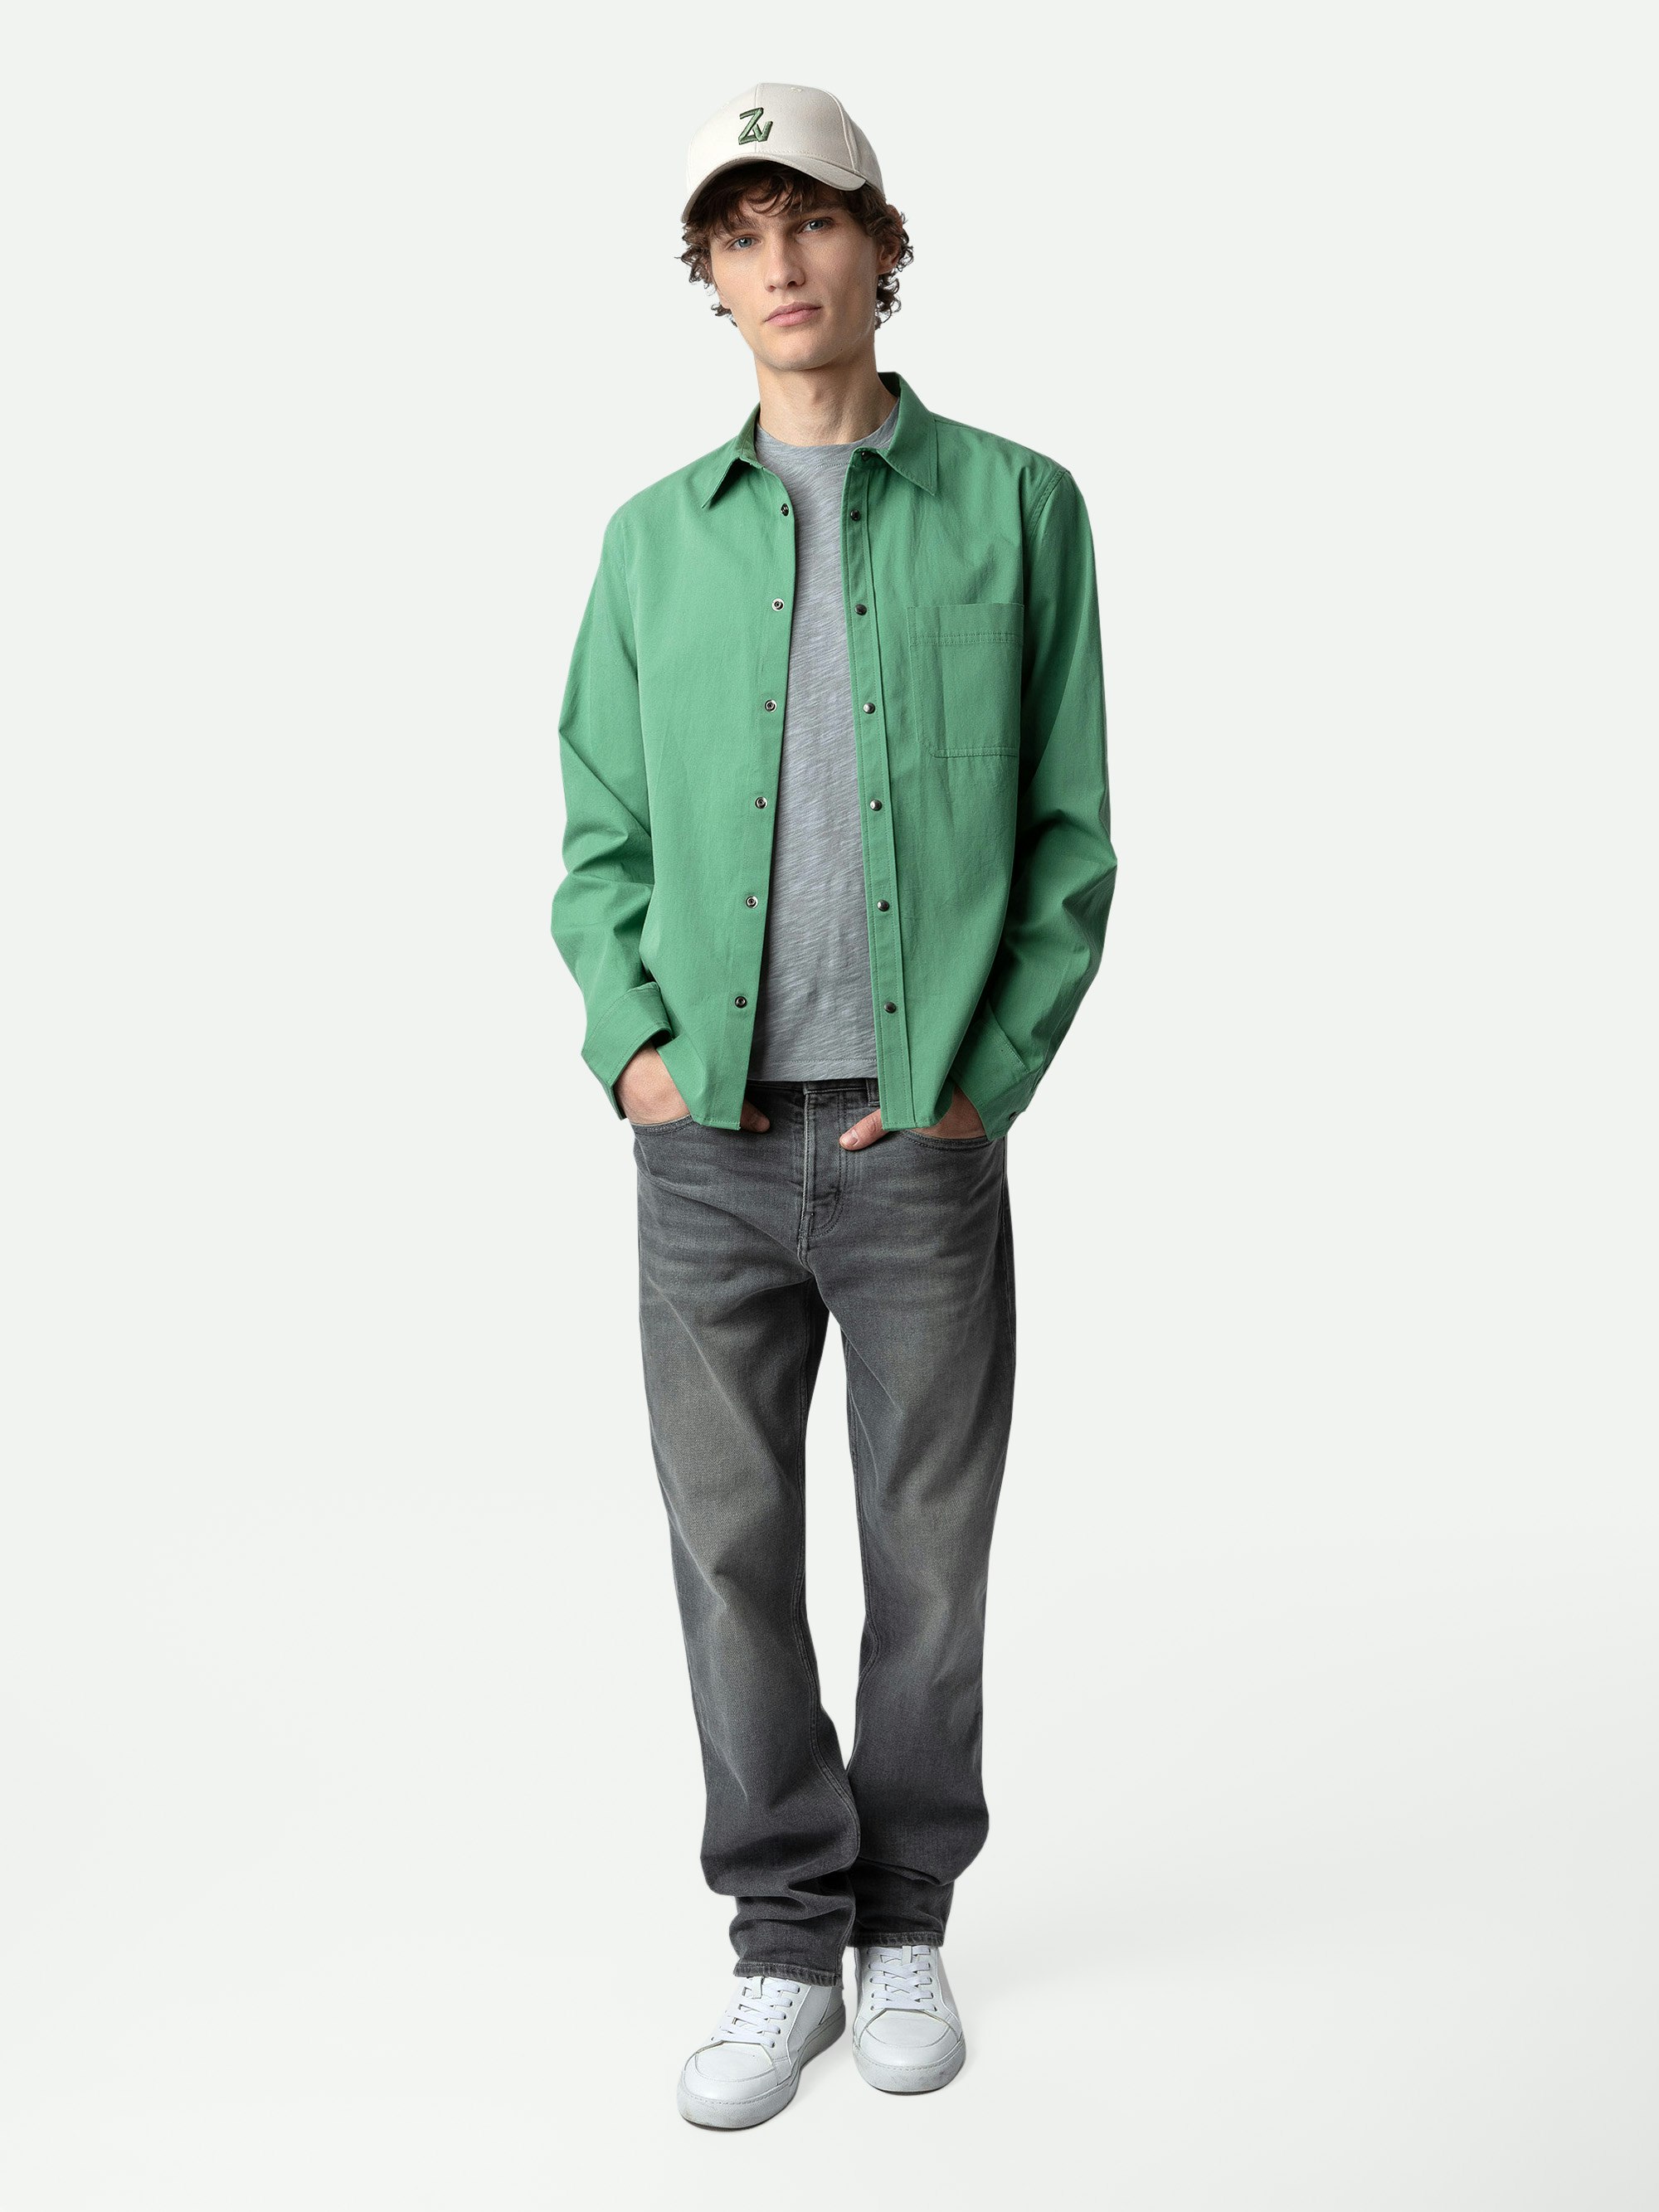 Stan Shirt - Green cotton twill shirt with patch pocket and customized details designed by Humberto Cruz.